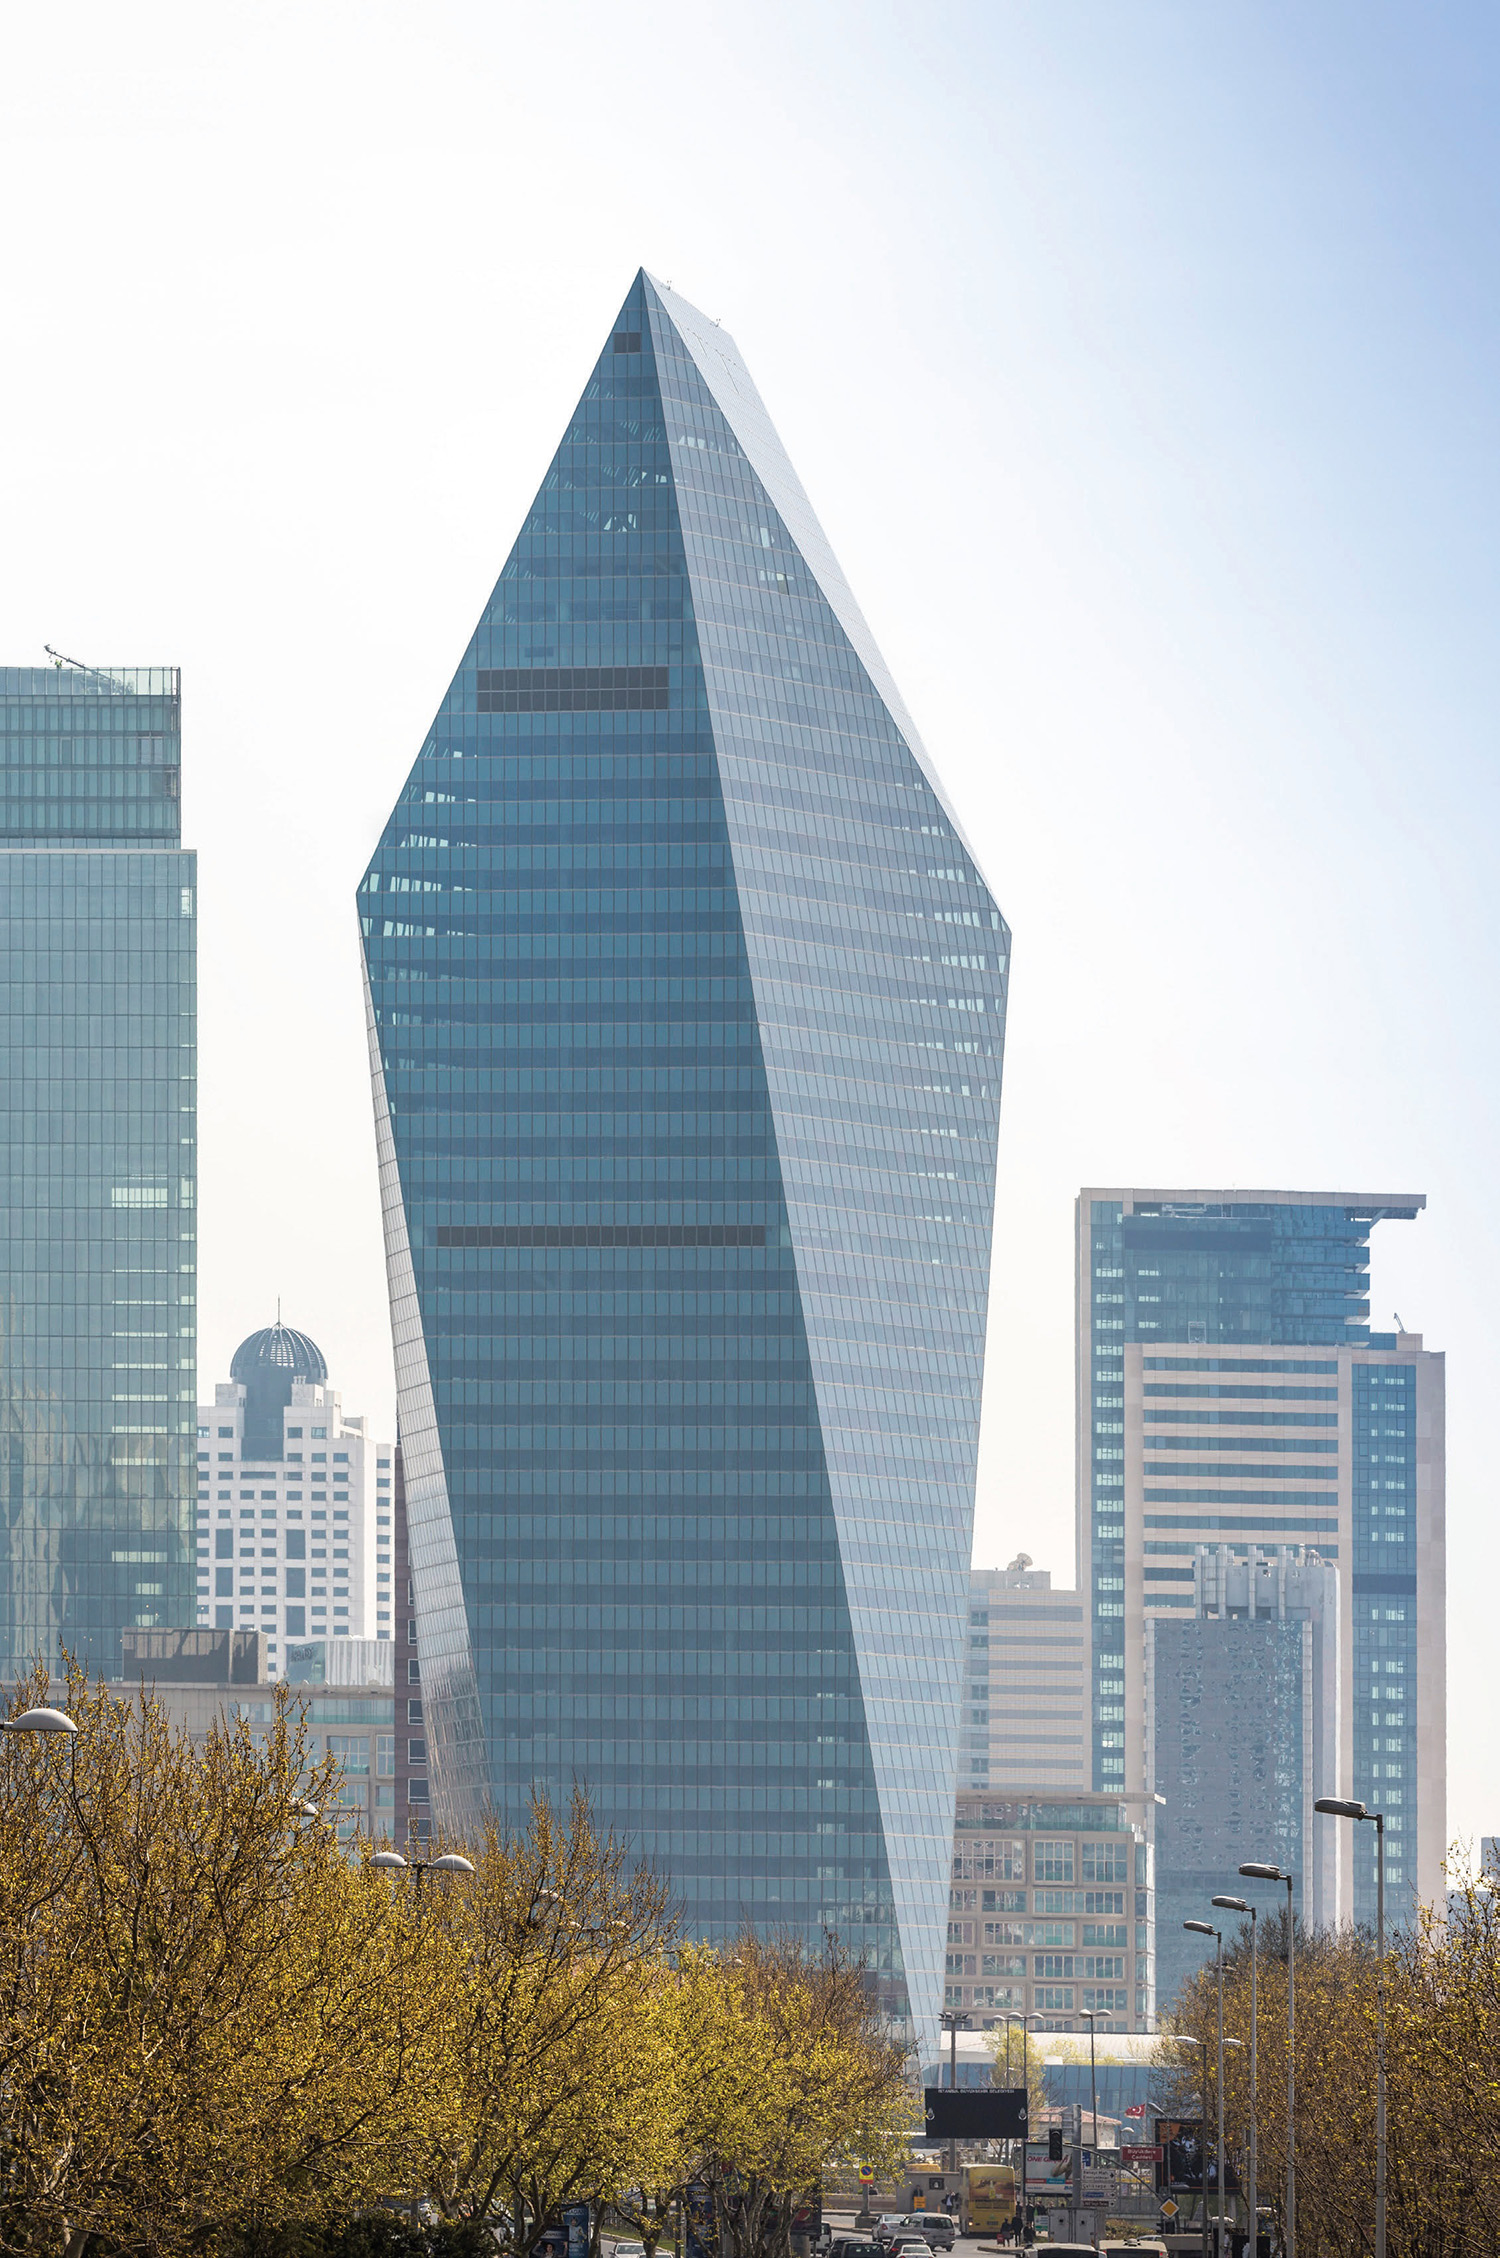 Soyak Kristalkule is one of the most attractive buildings at the new central business district in Istanbul